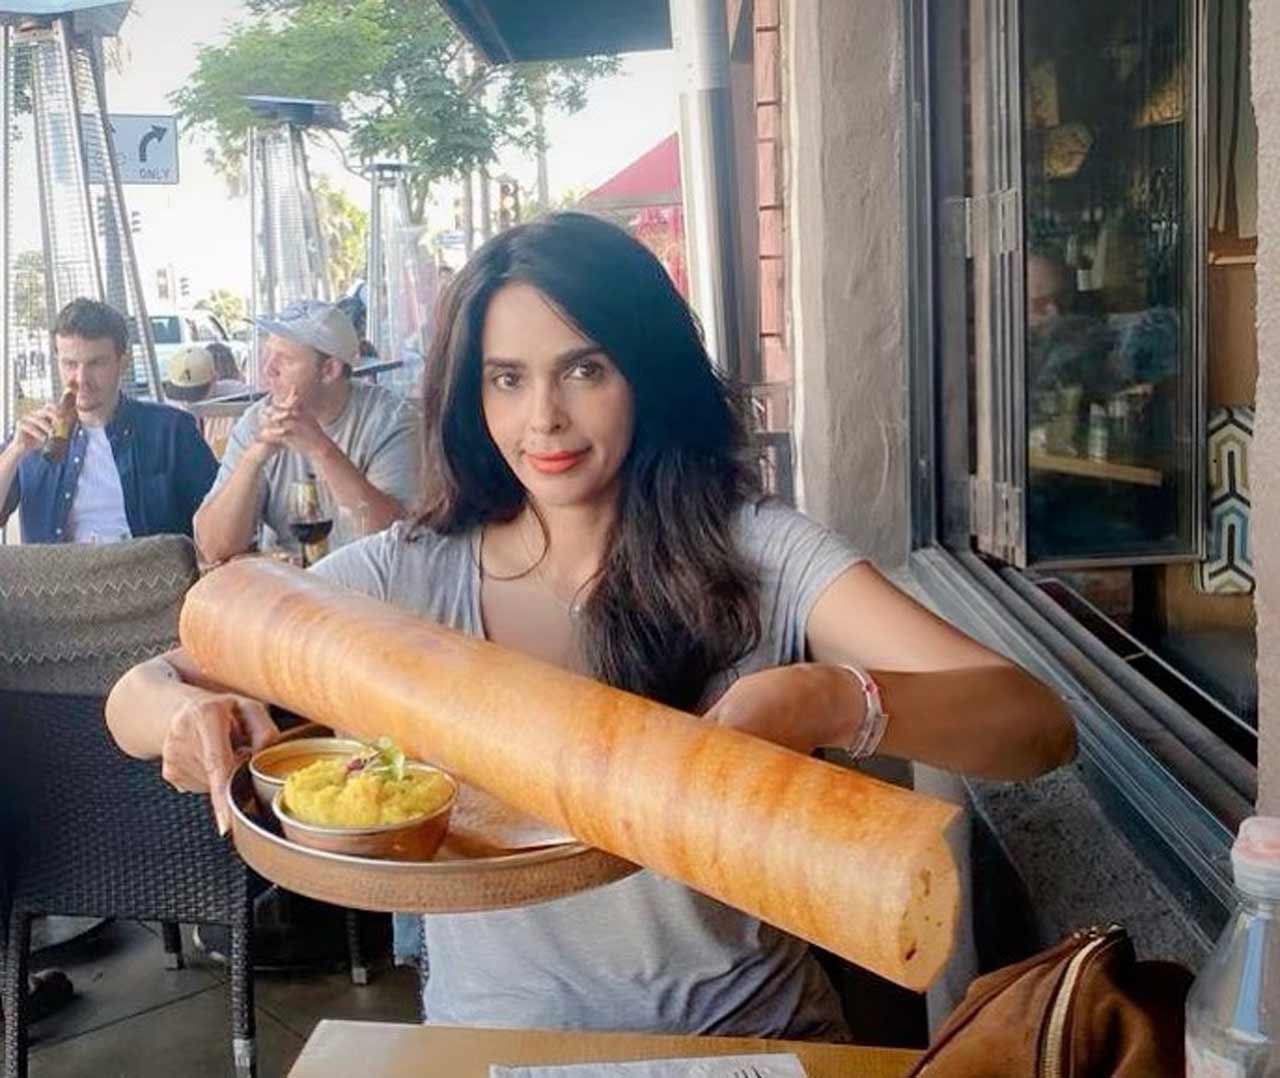 Mallika Sherawat: The 'Jalebi Bai' actress adheres to a strict vegetarian diet, which only consists of fruits and vegetables. She prefers water-rich fruits like watermelon and drinks a lot of water and consumes about one and a half kg of limes on a daily basis. Apart from abstaining from meat products, Mallika is also a non-smoker and teetotaller. She has stated that her body and hair stay healthy due to her strict vegetarian diet, her regular yoga sessions and being happy.